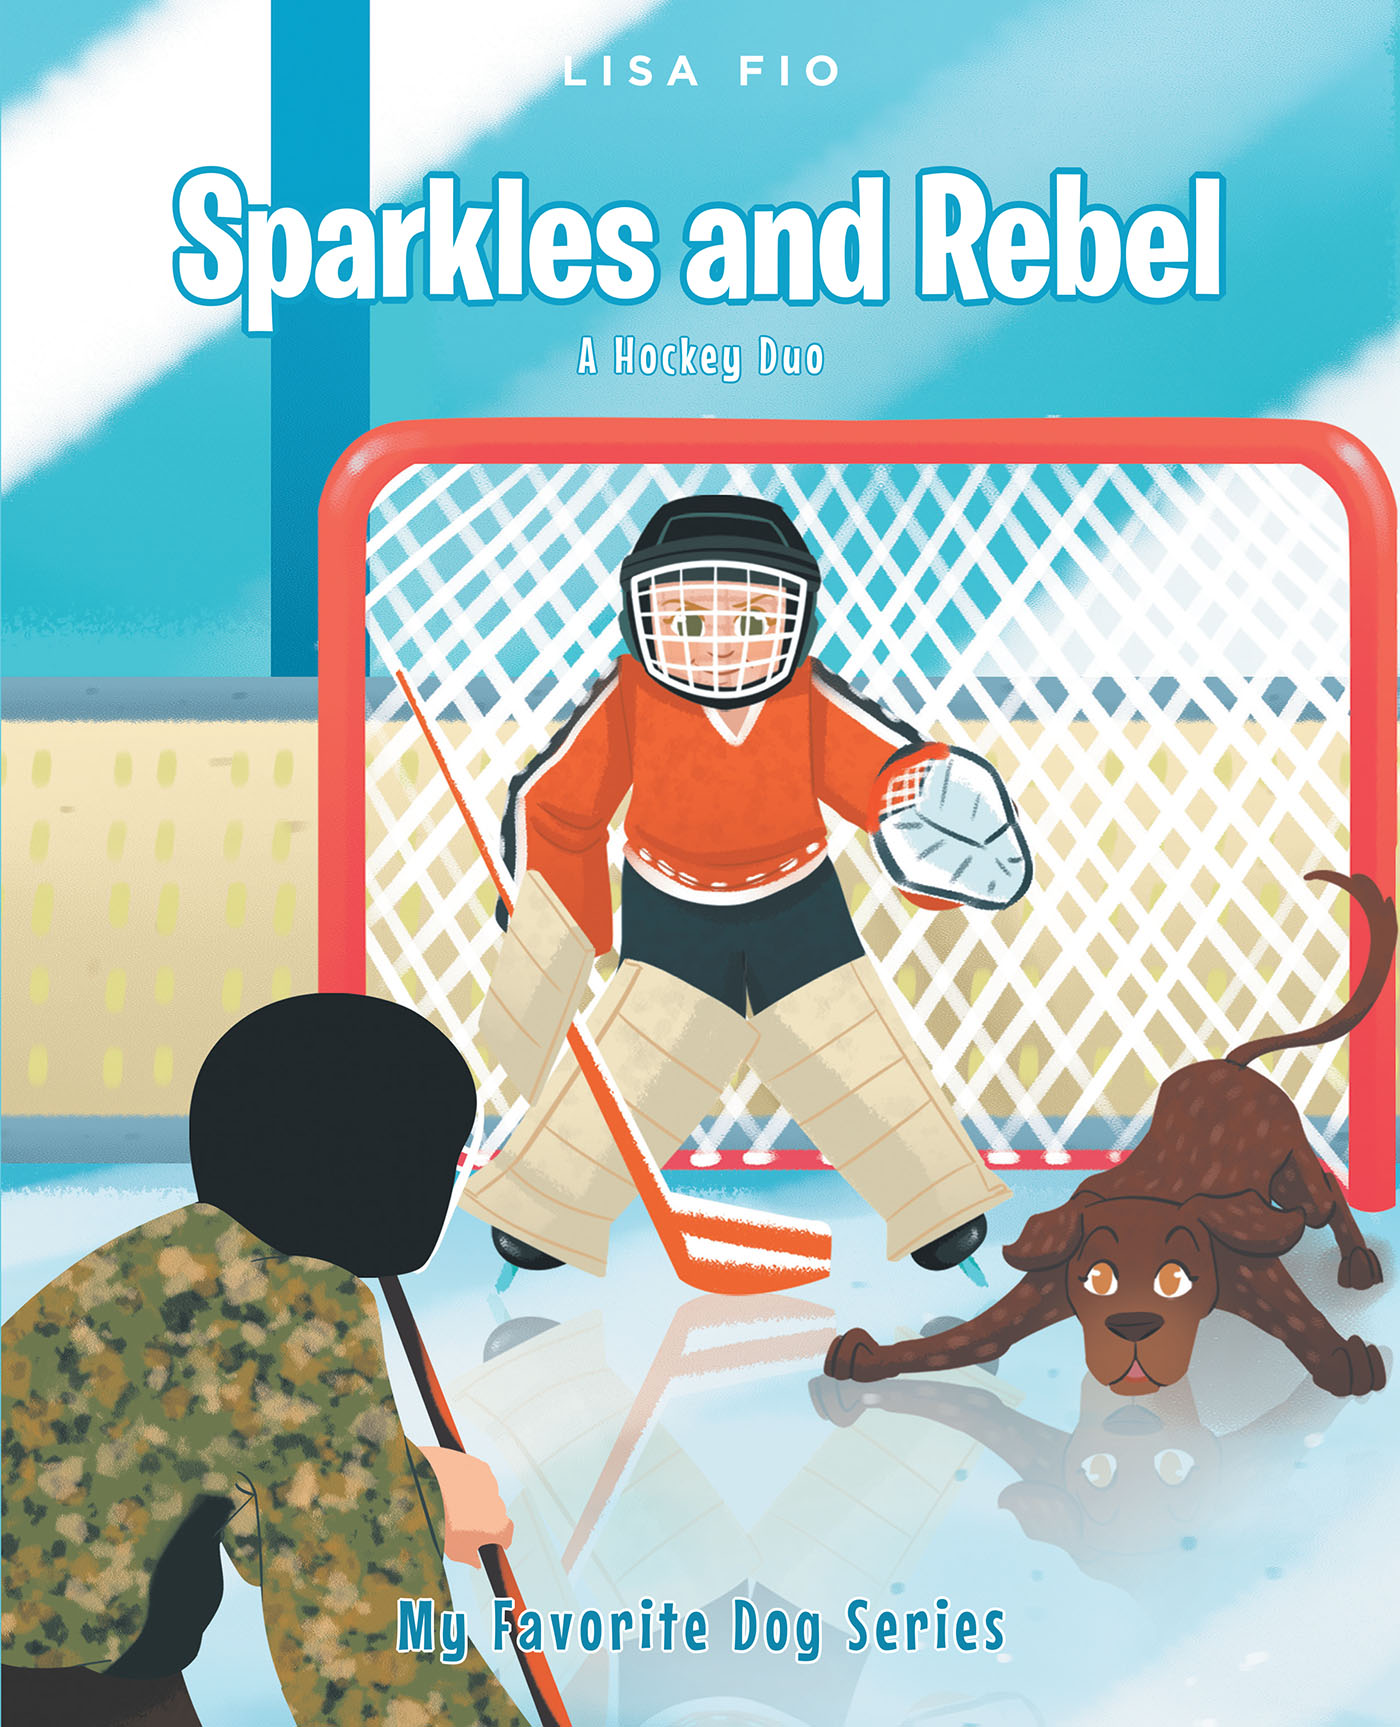 Lisa Fio’s New Book, "Sparkles and Rebel: A Hockey Duo," Explores One Girl's Passion for Ice Hockey and Her Close-Knit Relationship with Her Service Dog, Rebel